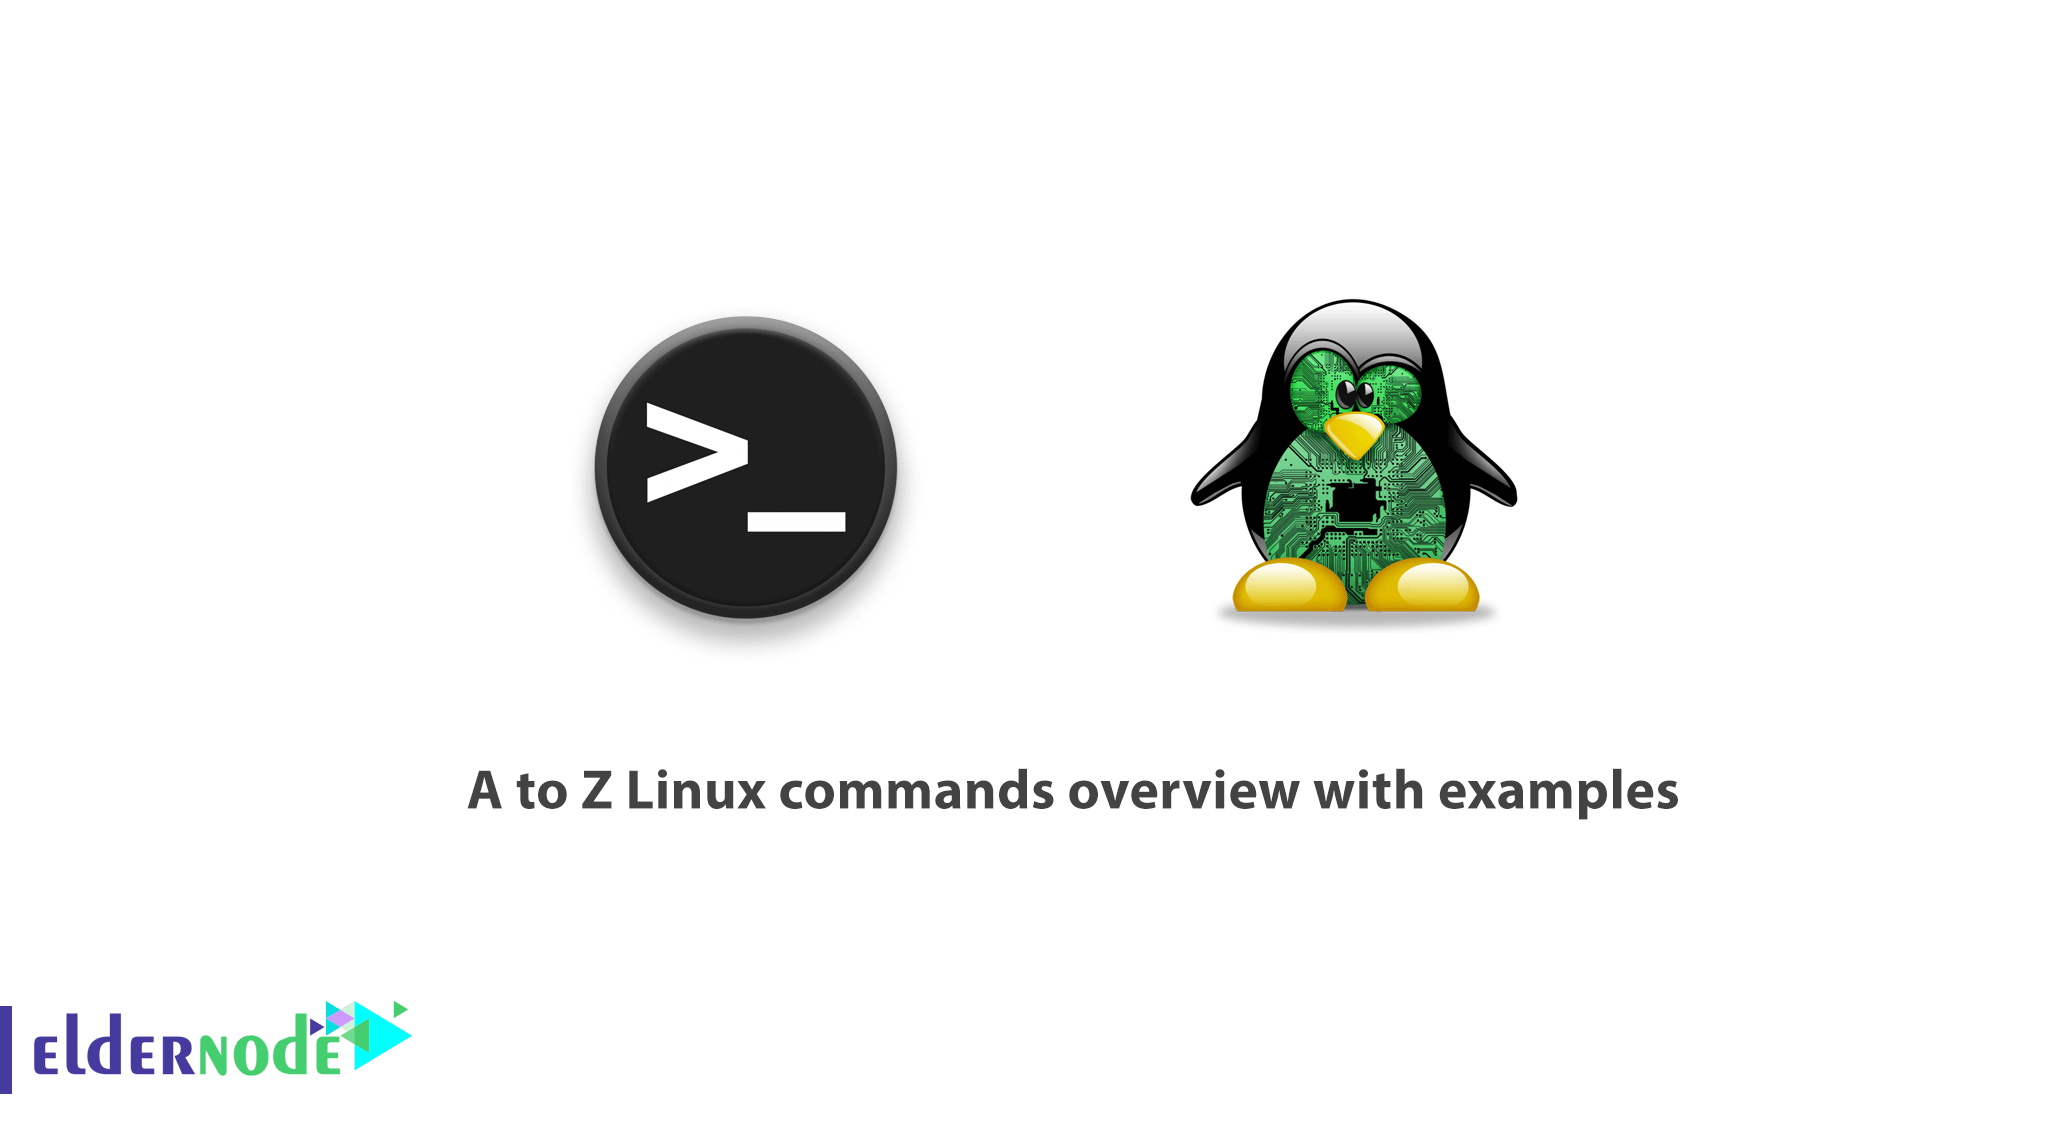 A to Z Linux commands overview with examples